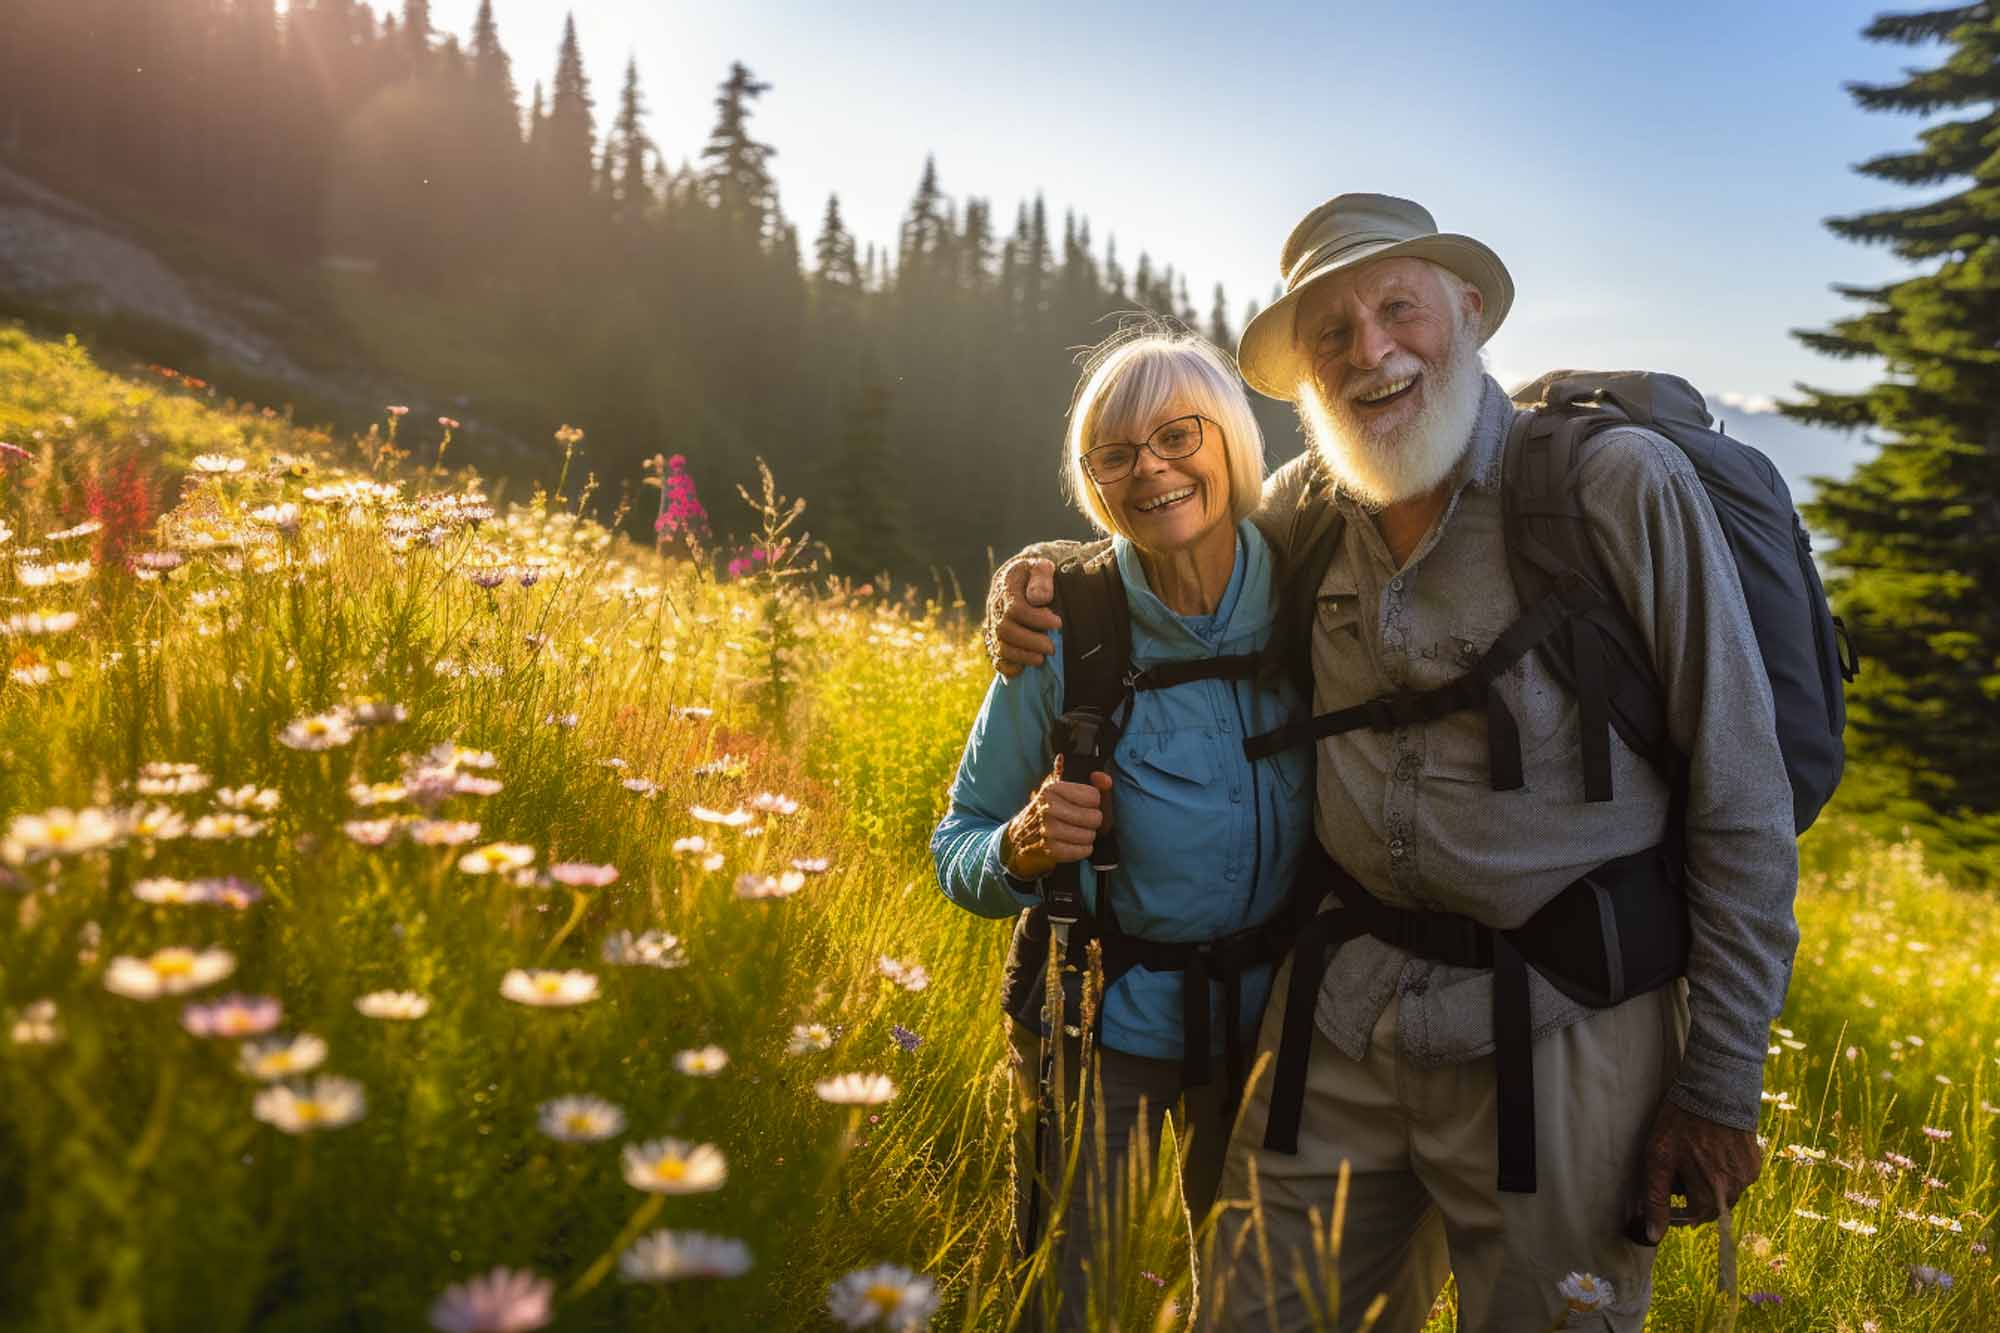 zavesmith_a_retired_couple_on_a_hike_in_the_mountains_morning_s_e6a7d580-22cd-4a2a-bd98-d4bc4c513a0e